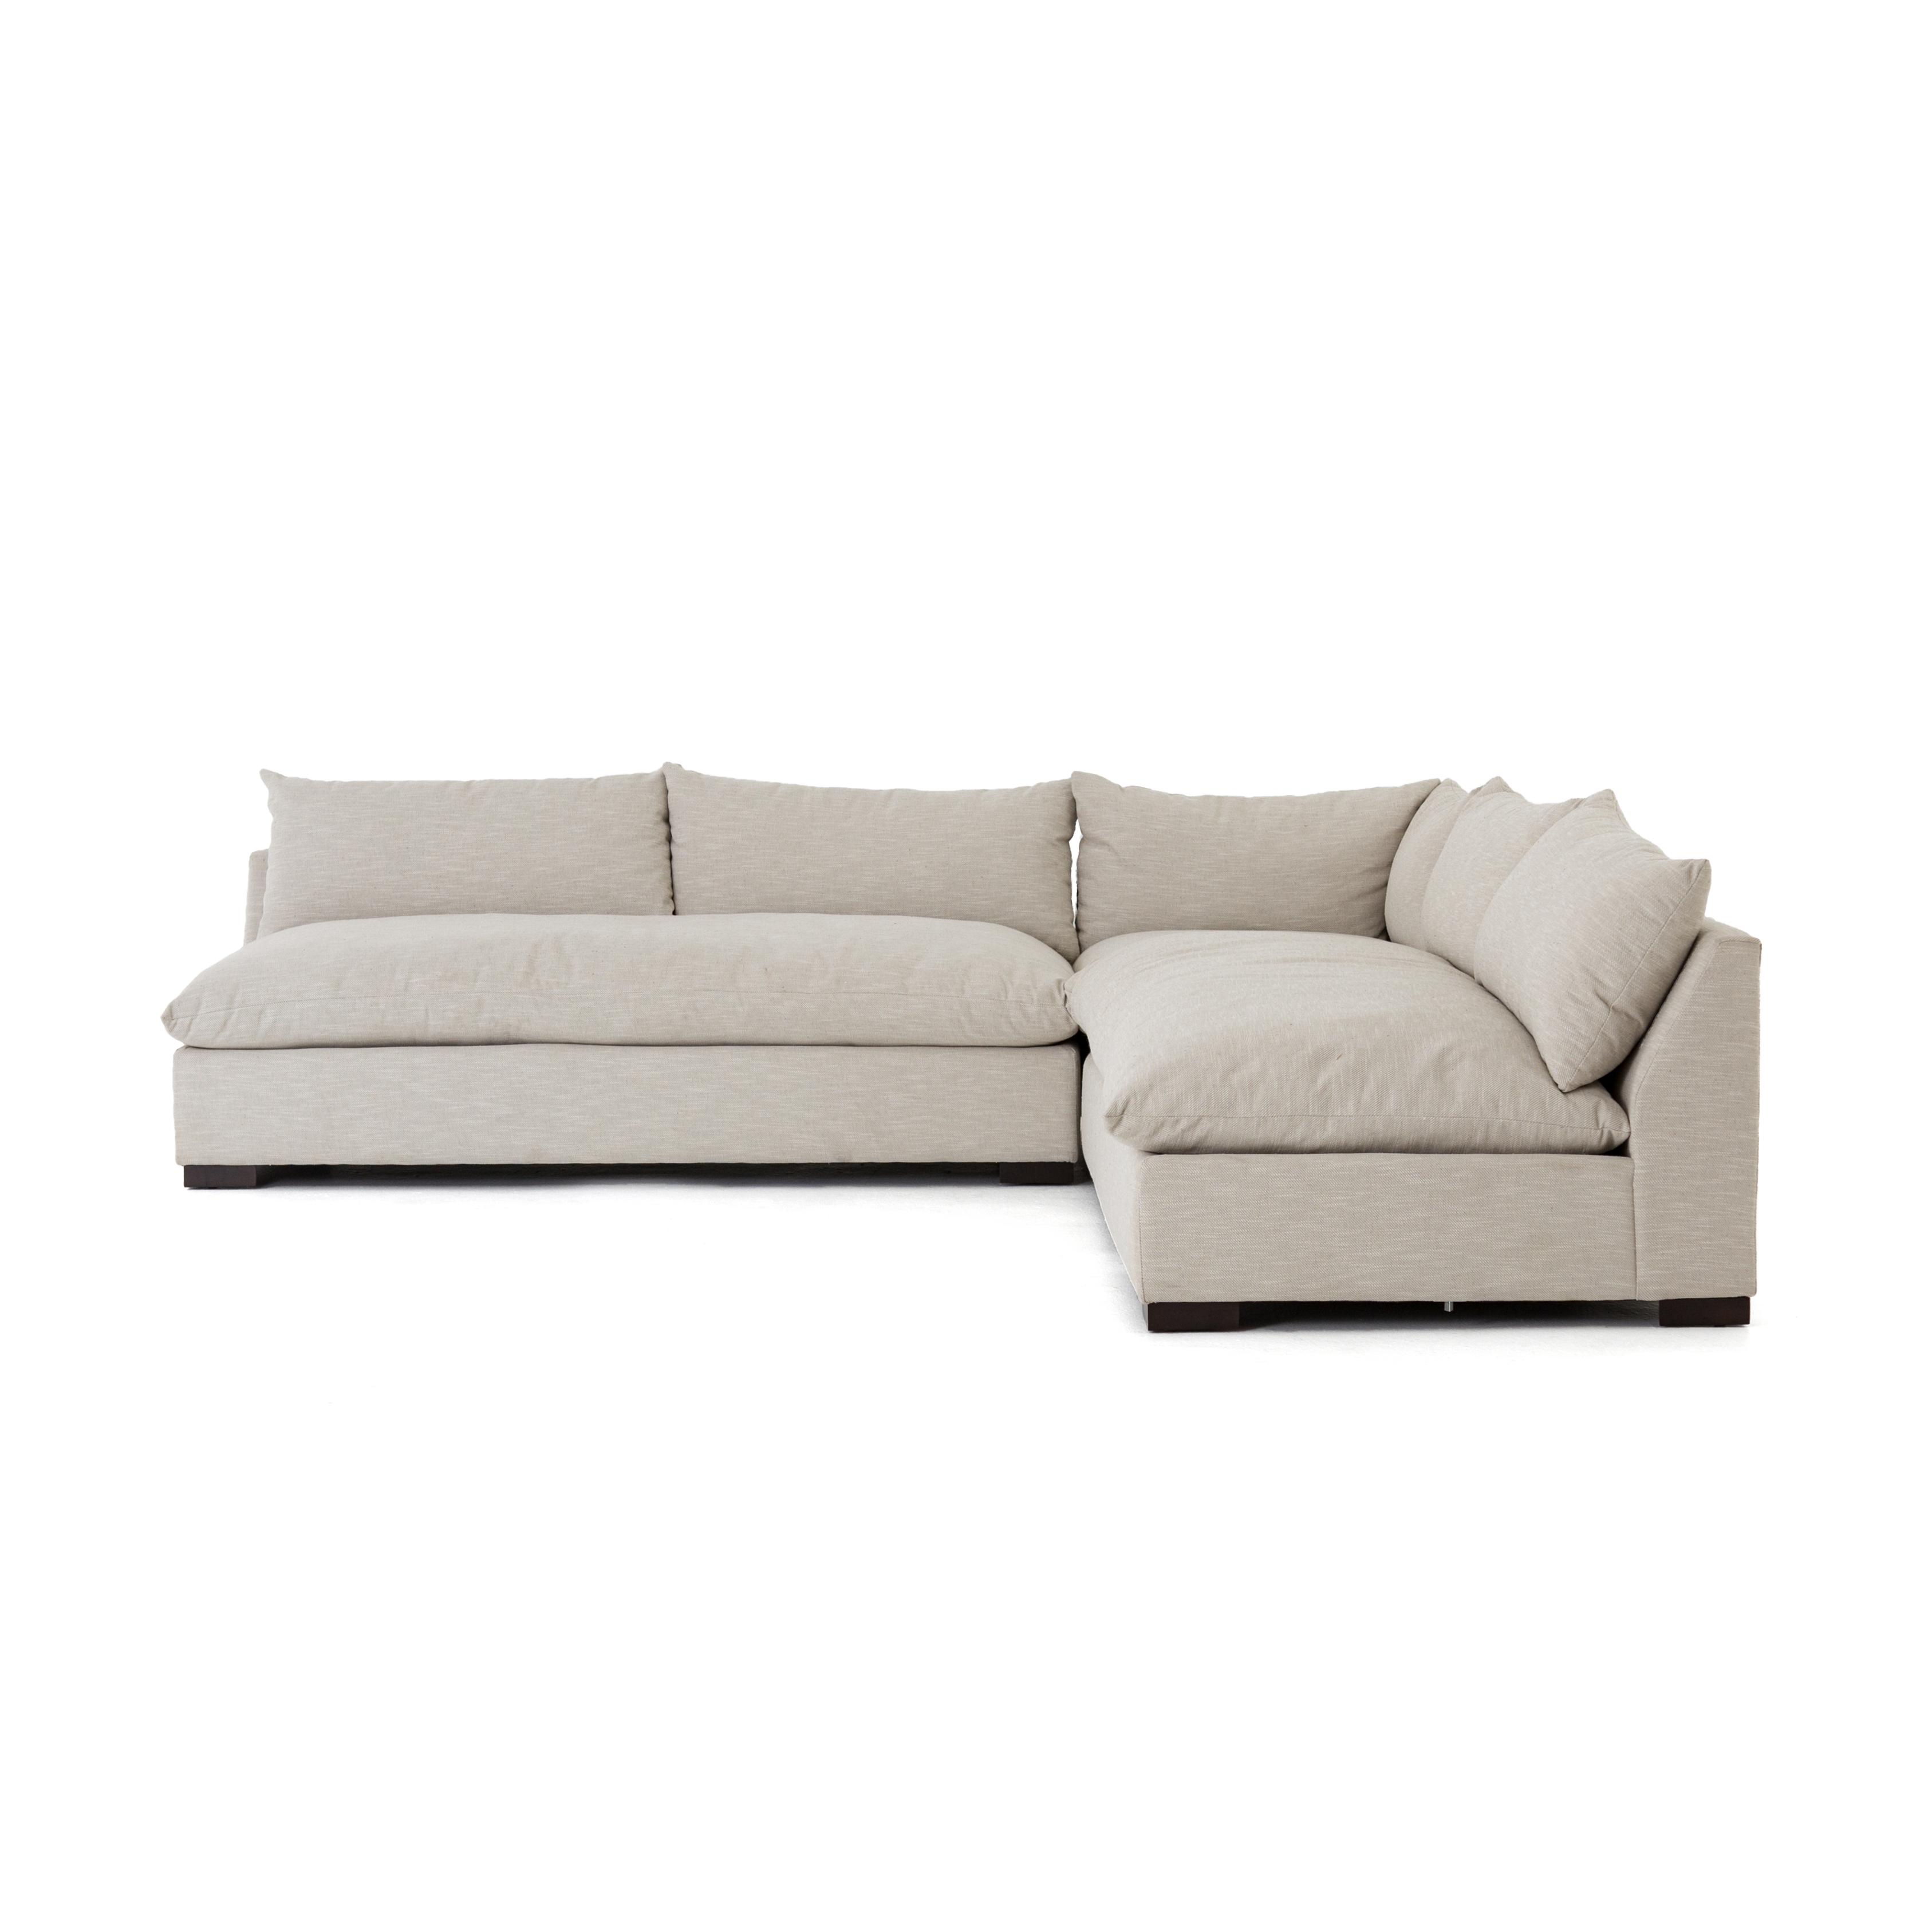 Grant 3-Pc Sectional-Ashby Oatmeal - Image 4